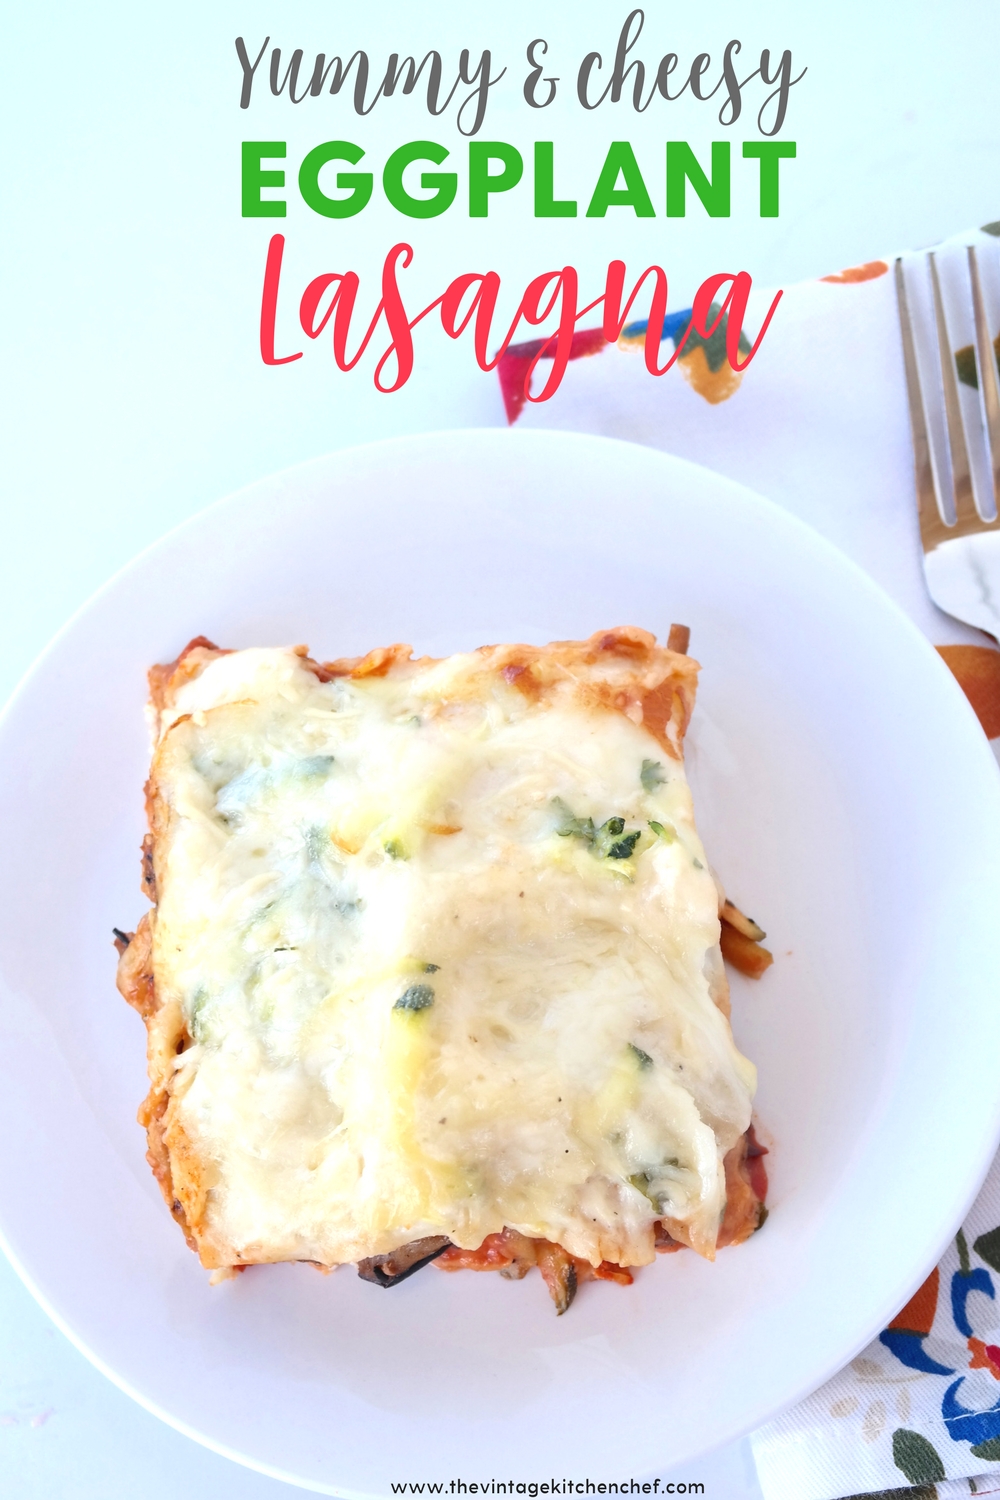 "Almost homemade" makes this delicious meatless lasagna so simple to make. Lots of eggplant, mushrooms, and zucchini along with loads of cheese. YUM!